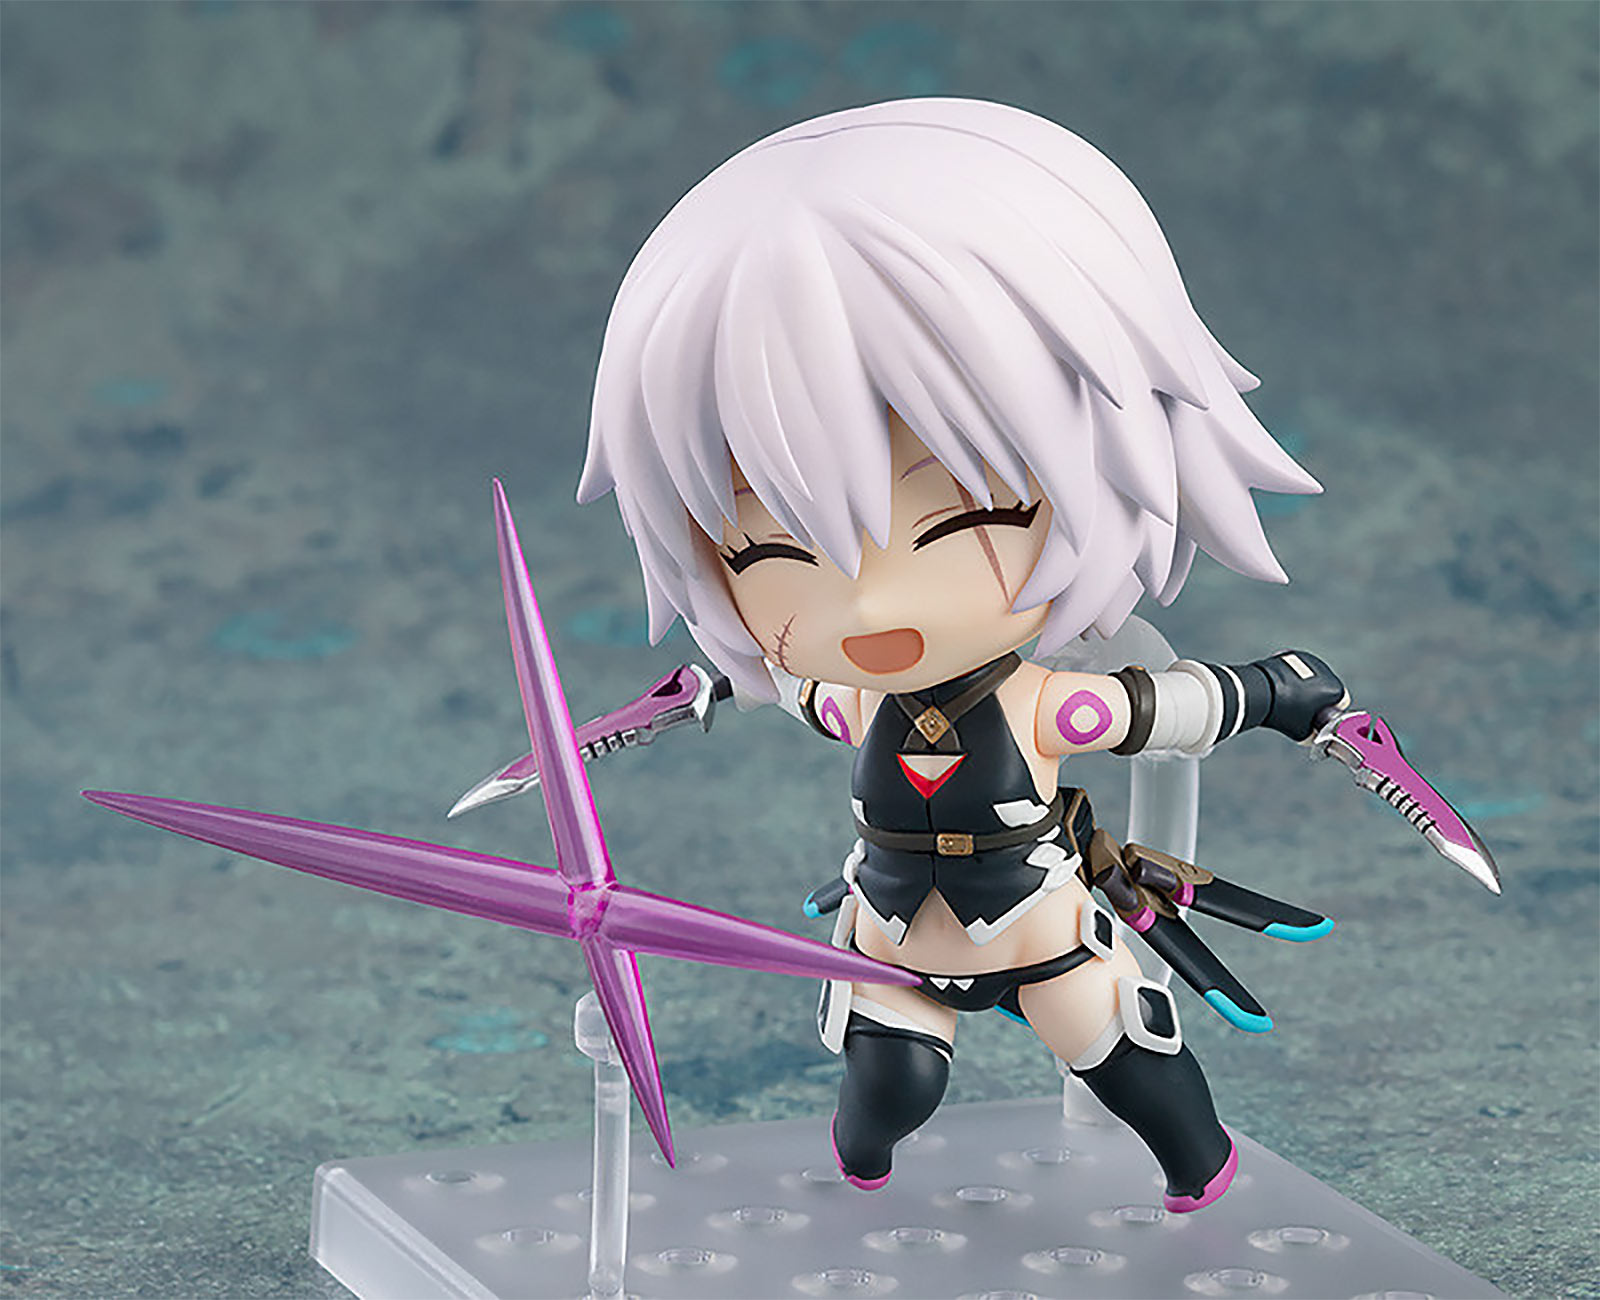 Fate/Grand Order - Assassin Jack the Ripper Nendoroid Action Figure